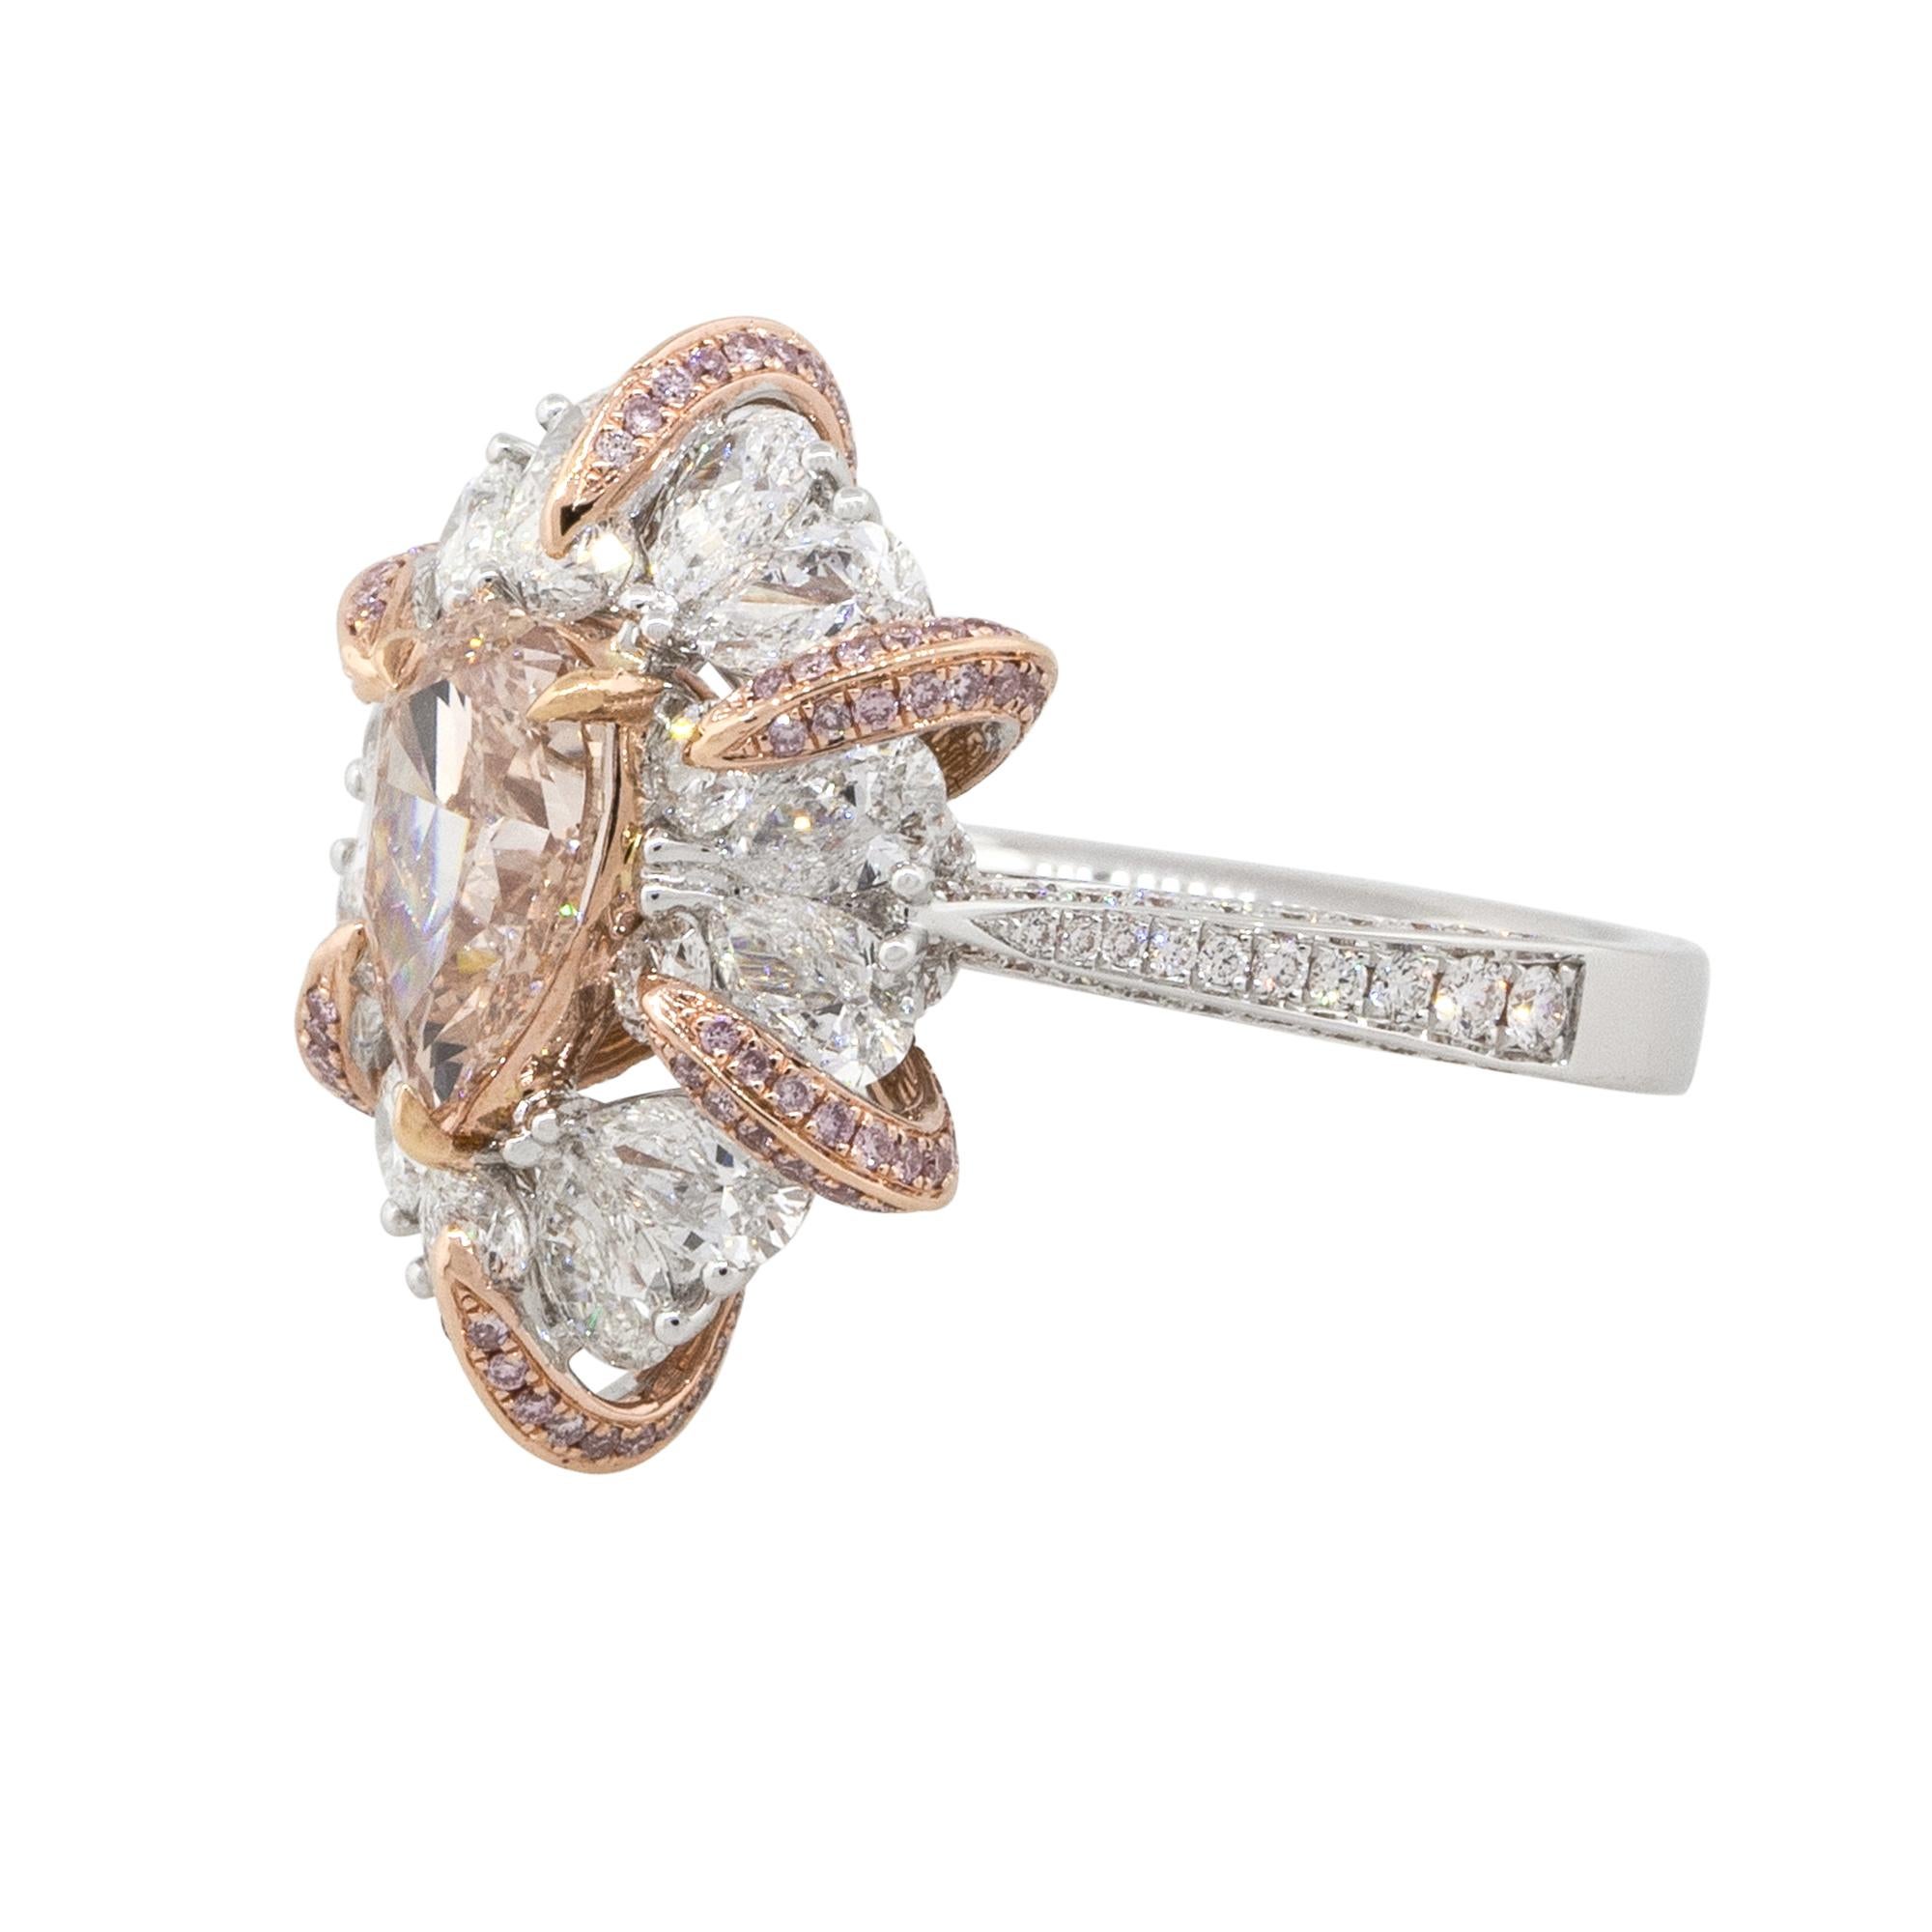 Material: 18k white gold & 18k rose gold
Center Diamond Details: 1.50ct pear shape Diamond. Diamond is Fancy Orange-Brown in color and VVS1 in clarity. GIA: 5273296645
Diamond details: Approx. 0.80ctw of round cut Diamonds. Diamonds are G/H in color